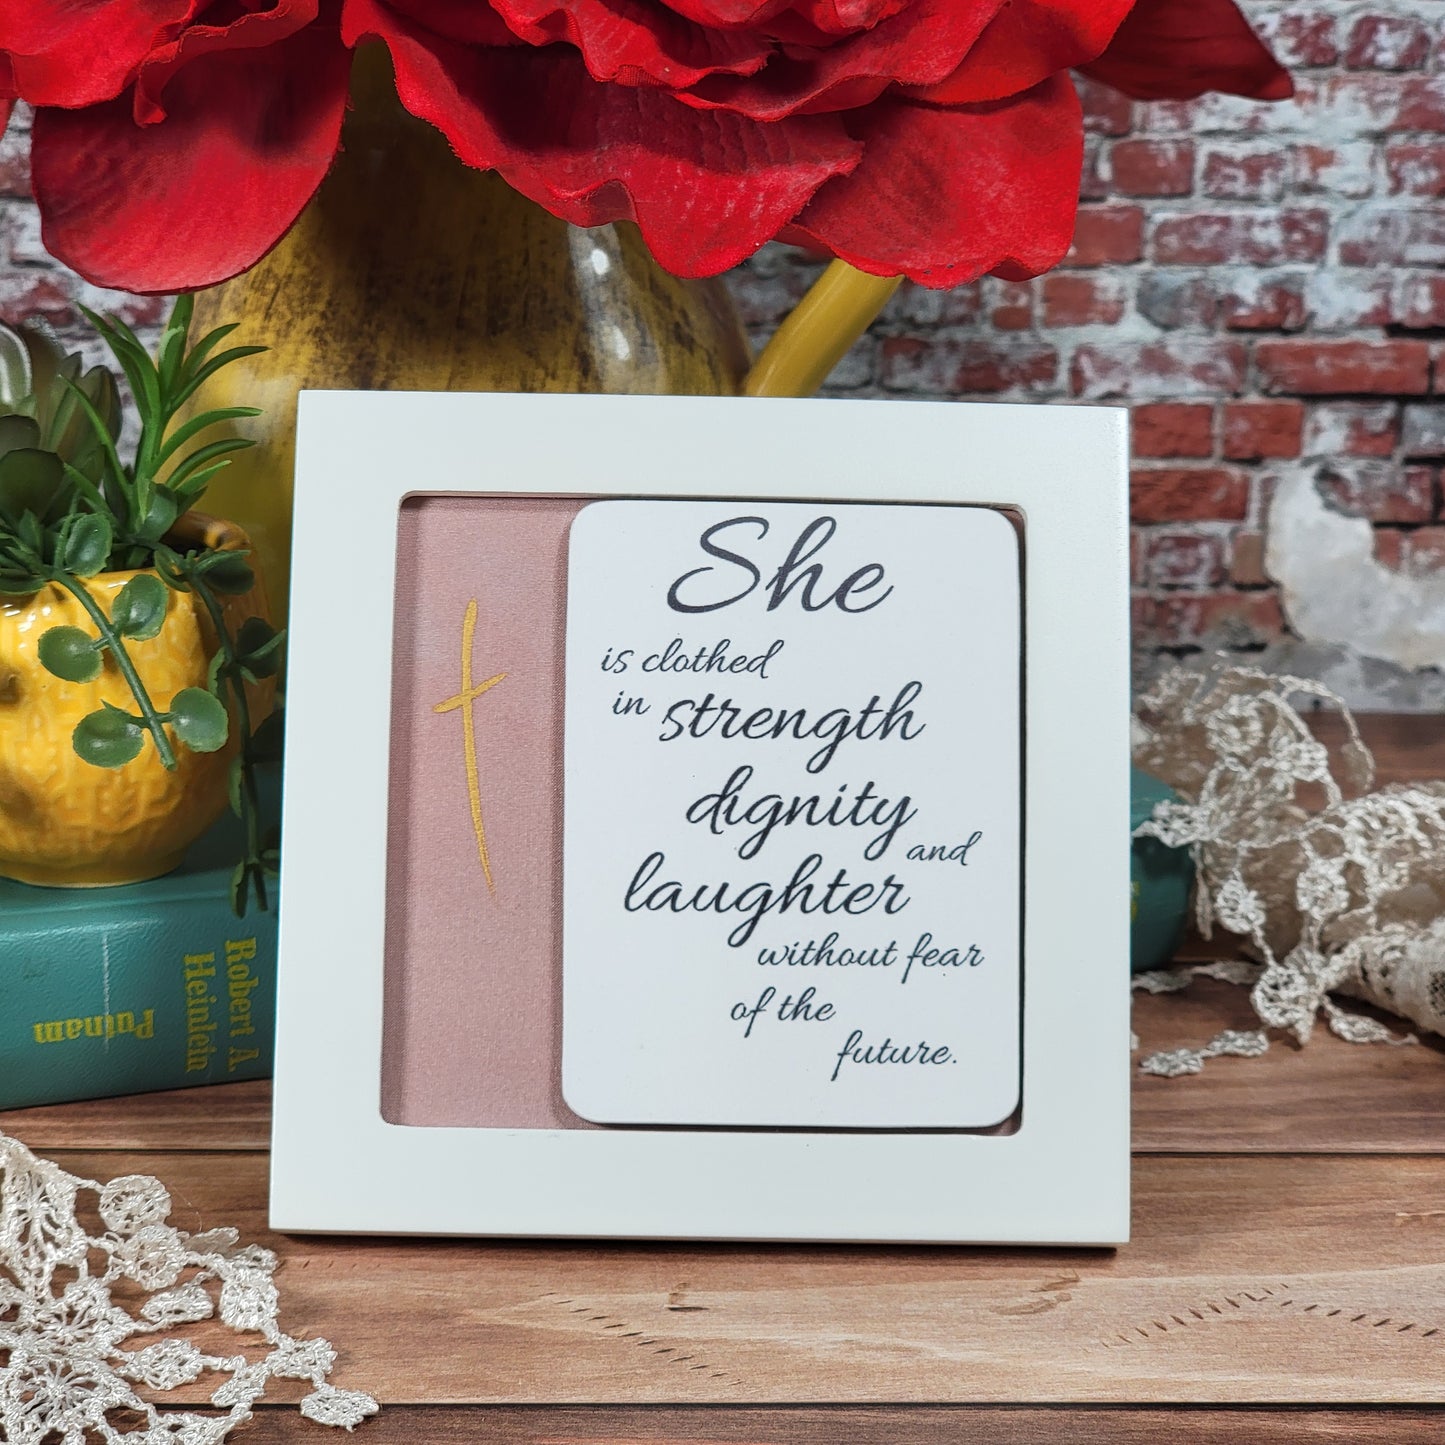 She is clothed in strength dignity and laughter without fear of the future - Mini Frame - 3